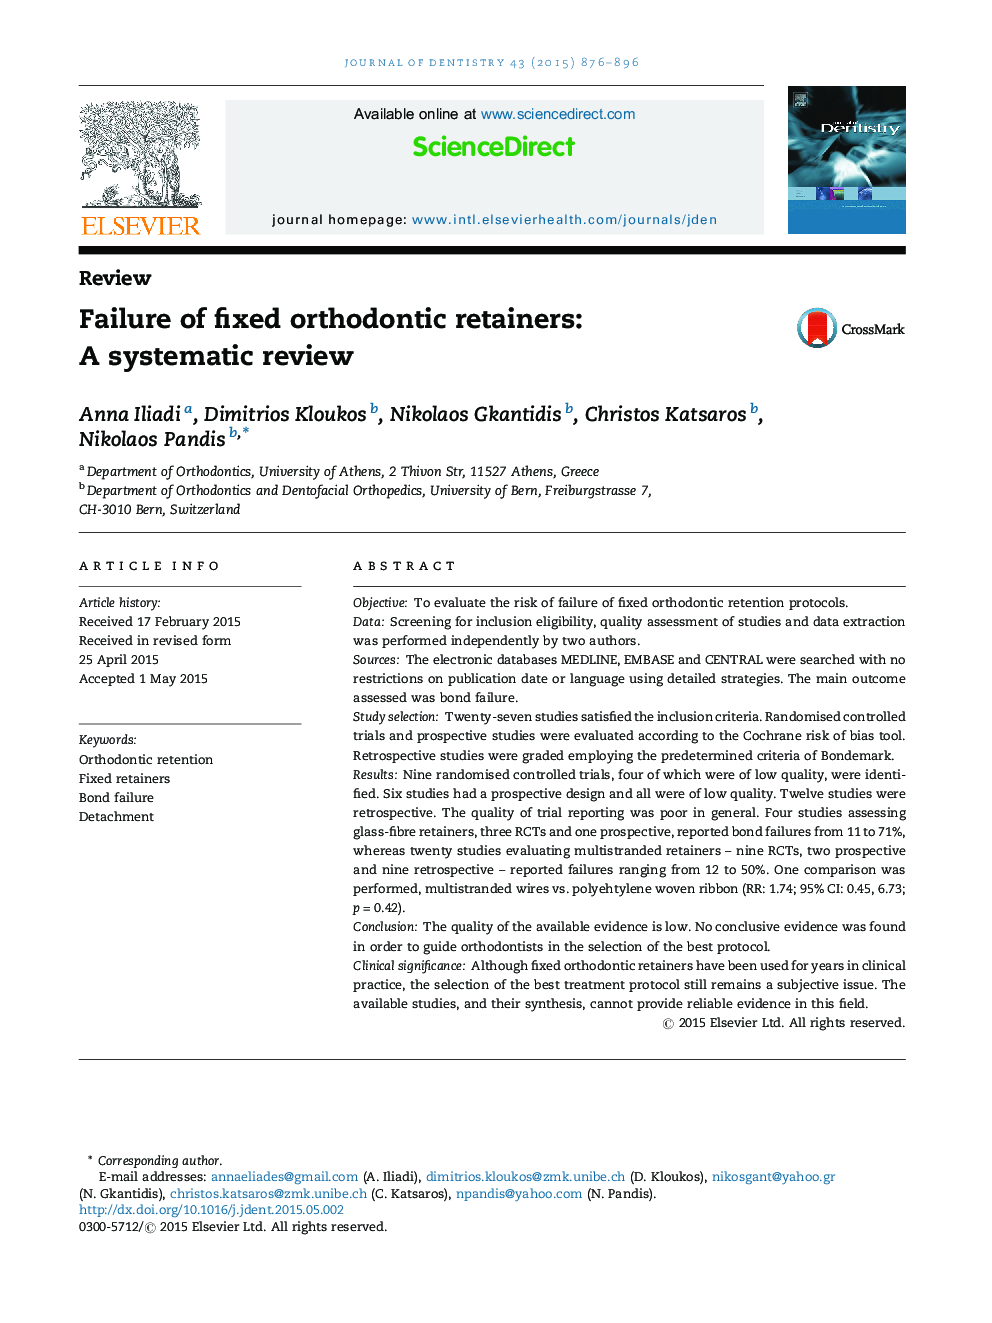 ReviewFailure of fixed orthodontic retainers: A systematic review